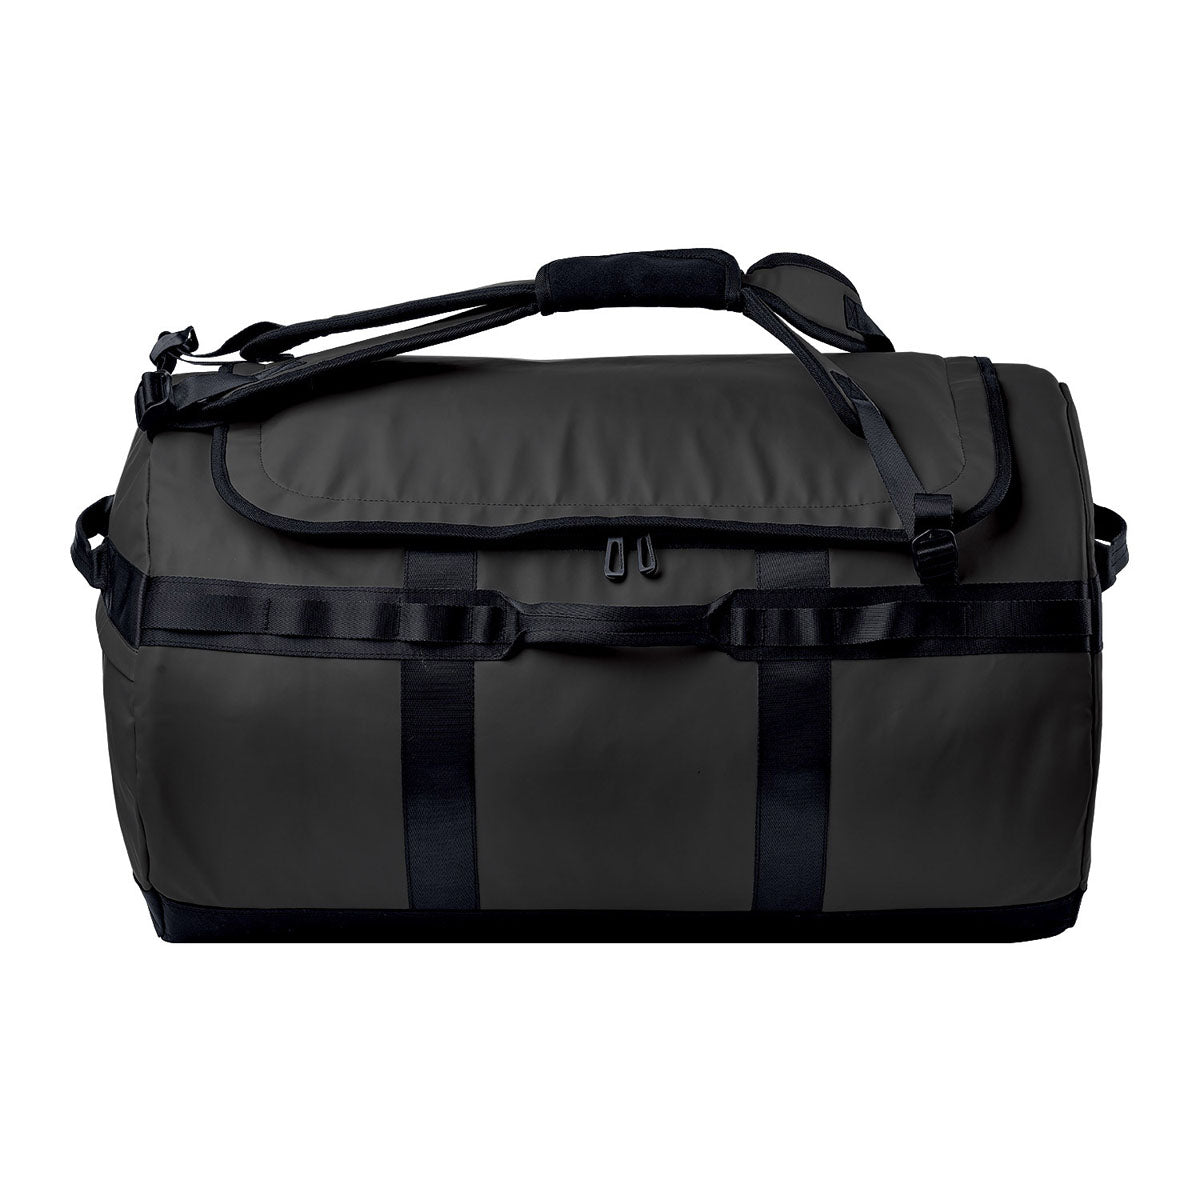 Stormtech - Atlantis Waterproof Gear Bag (M) - GBW-1M -$75.00 - Safety  Products Canada